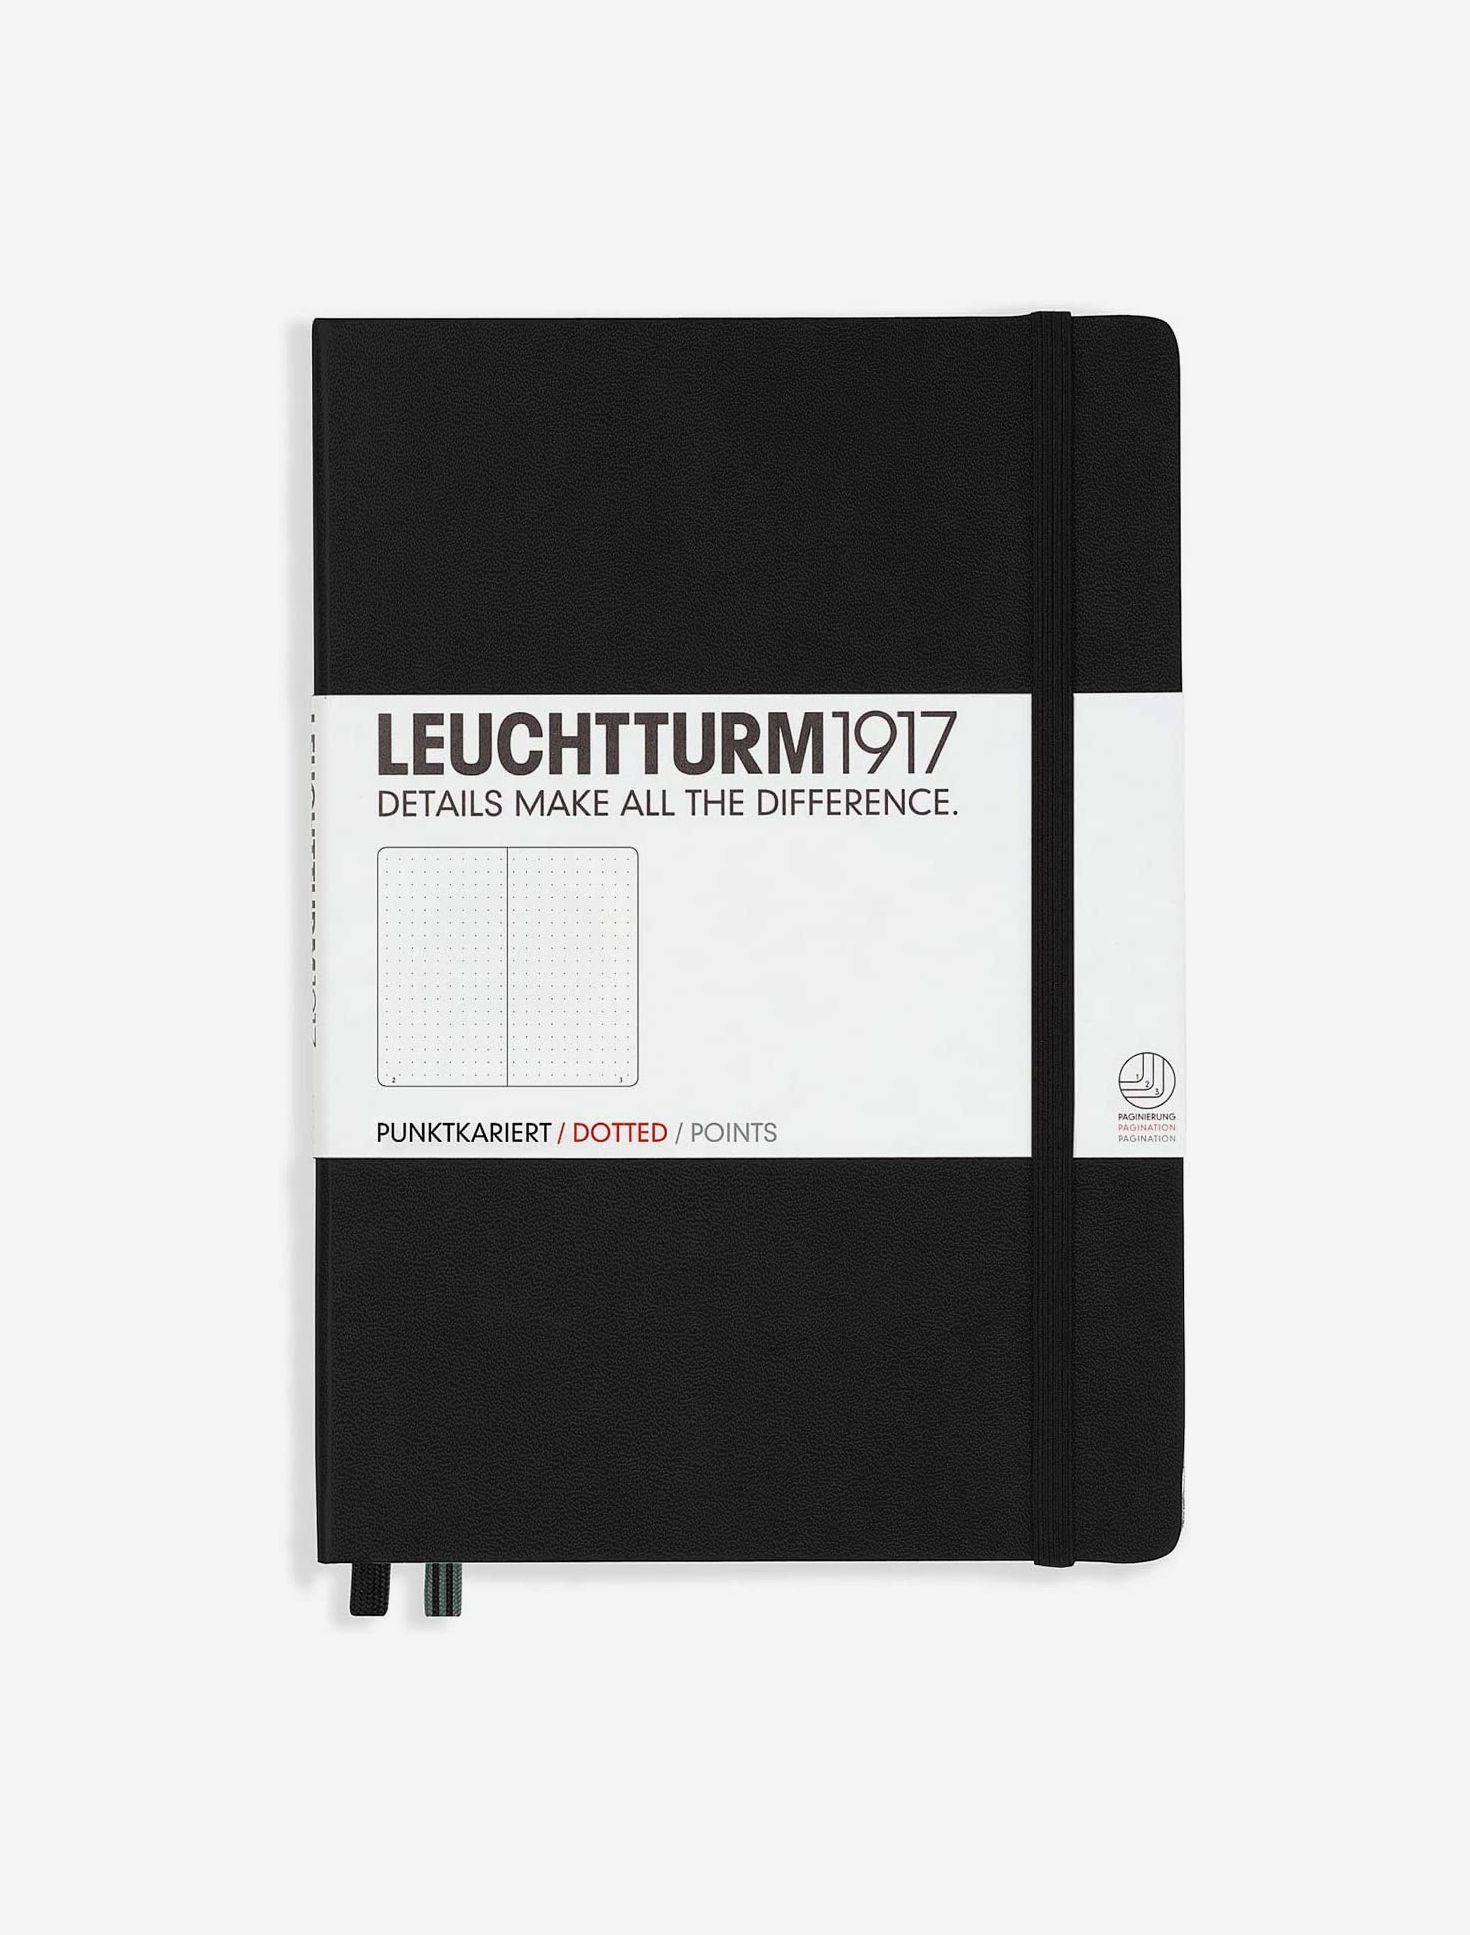 Best notebooks 2022: For work, college or journaling